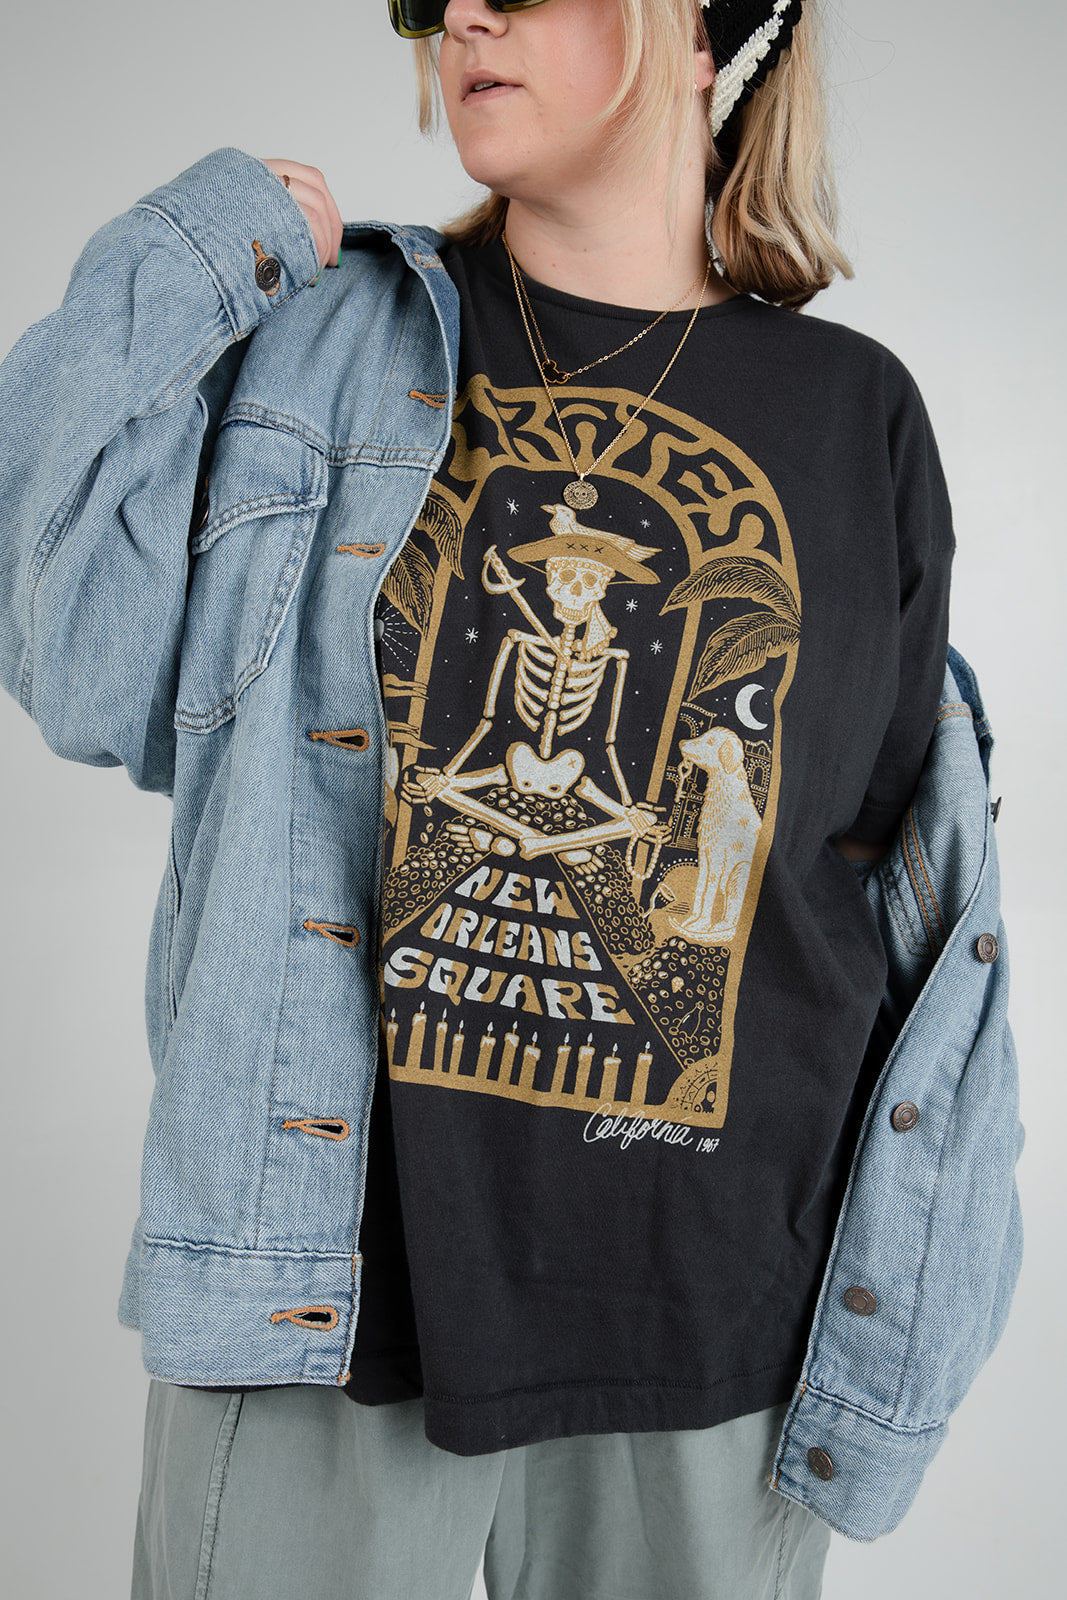 The Pirate Oversized Tee in Vintage Black